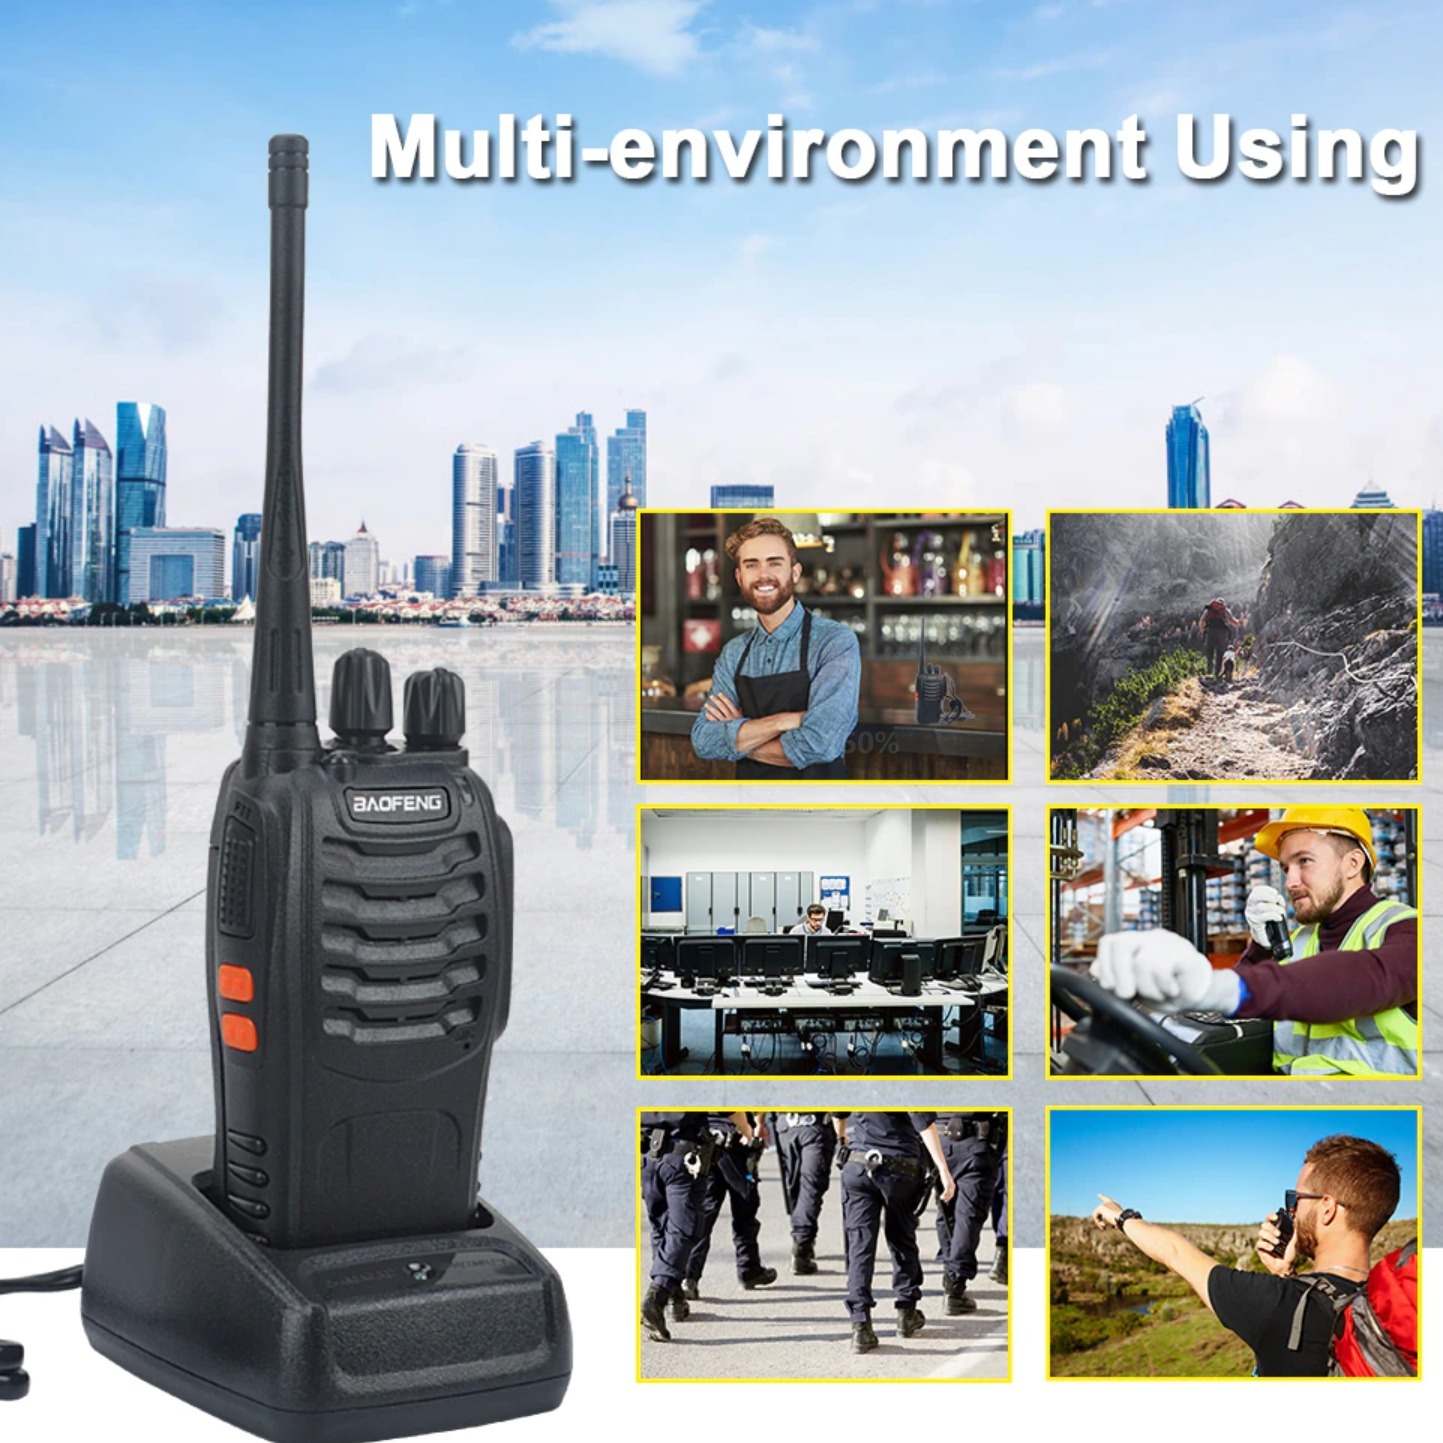 Baofeng Bf-888s Two Way Radio - 400-470mhz Uhf Walkie Talkie With Anti-skid Design For Clear Communication And Easy Handling image